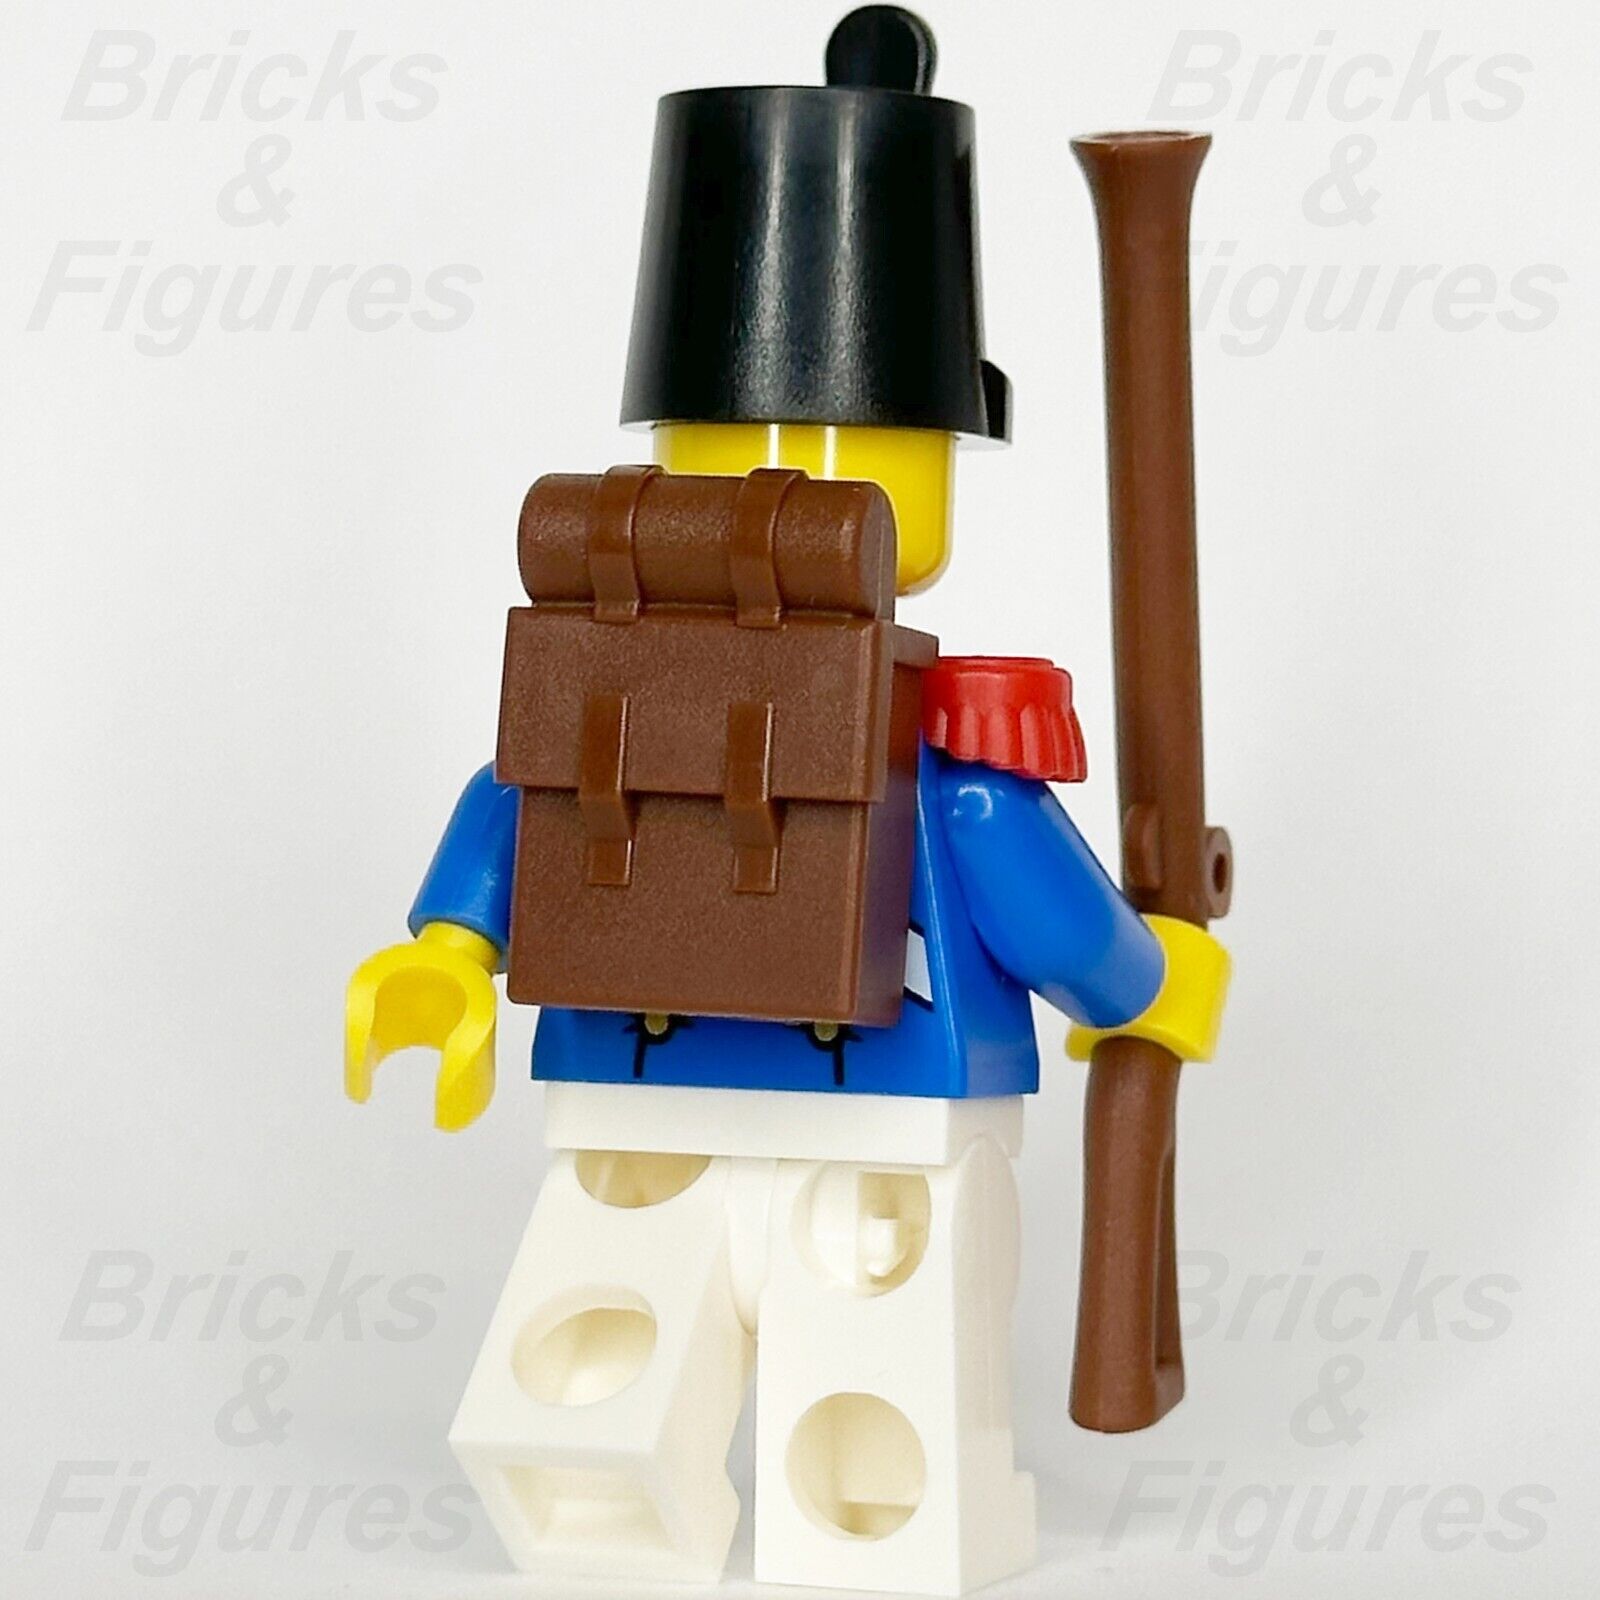 LEGO Pirates Imperial Soldier IV Minifigure Soldiers Male w/ Musket 10320 pi196 - Bricks & Figures